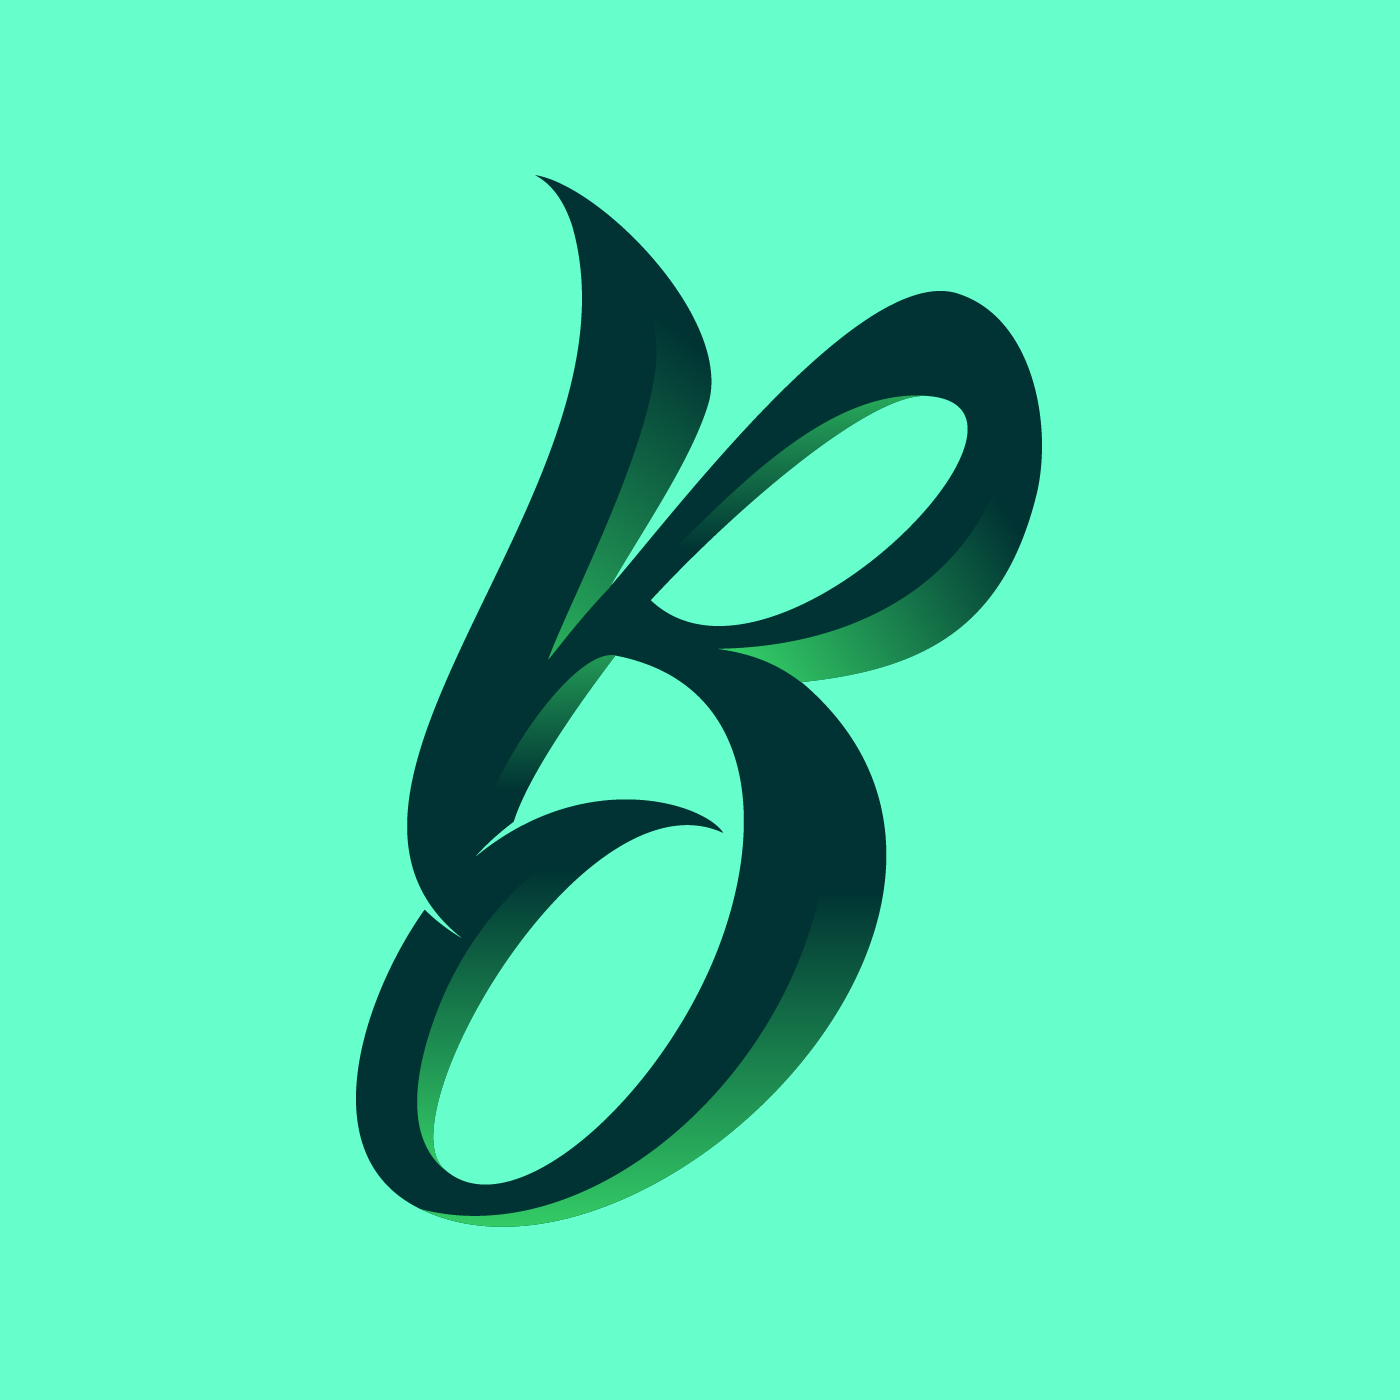 3D Script Letter B Typography Vector - Download Free ...